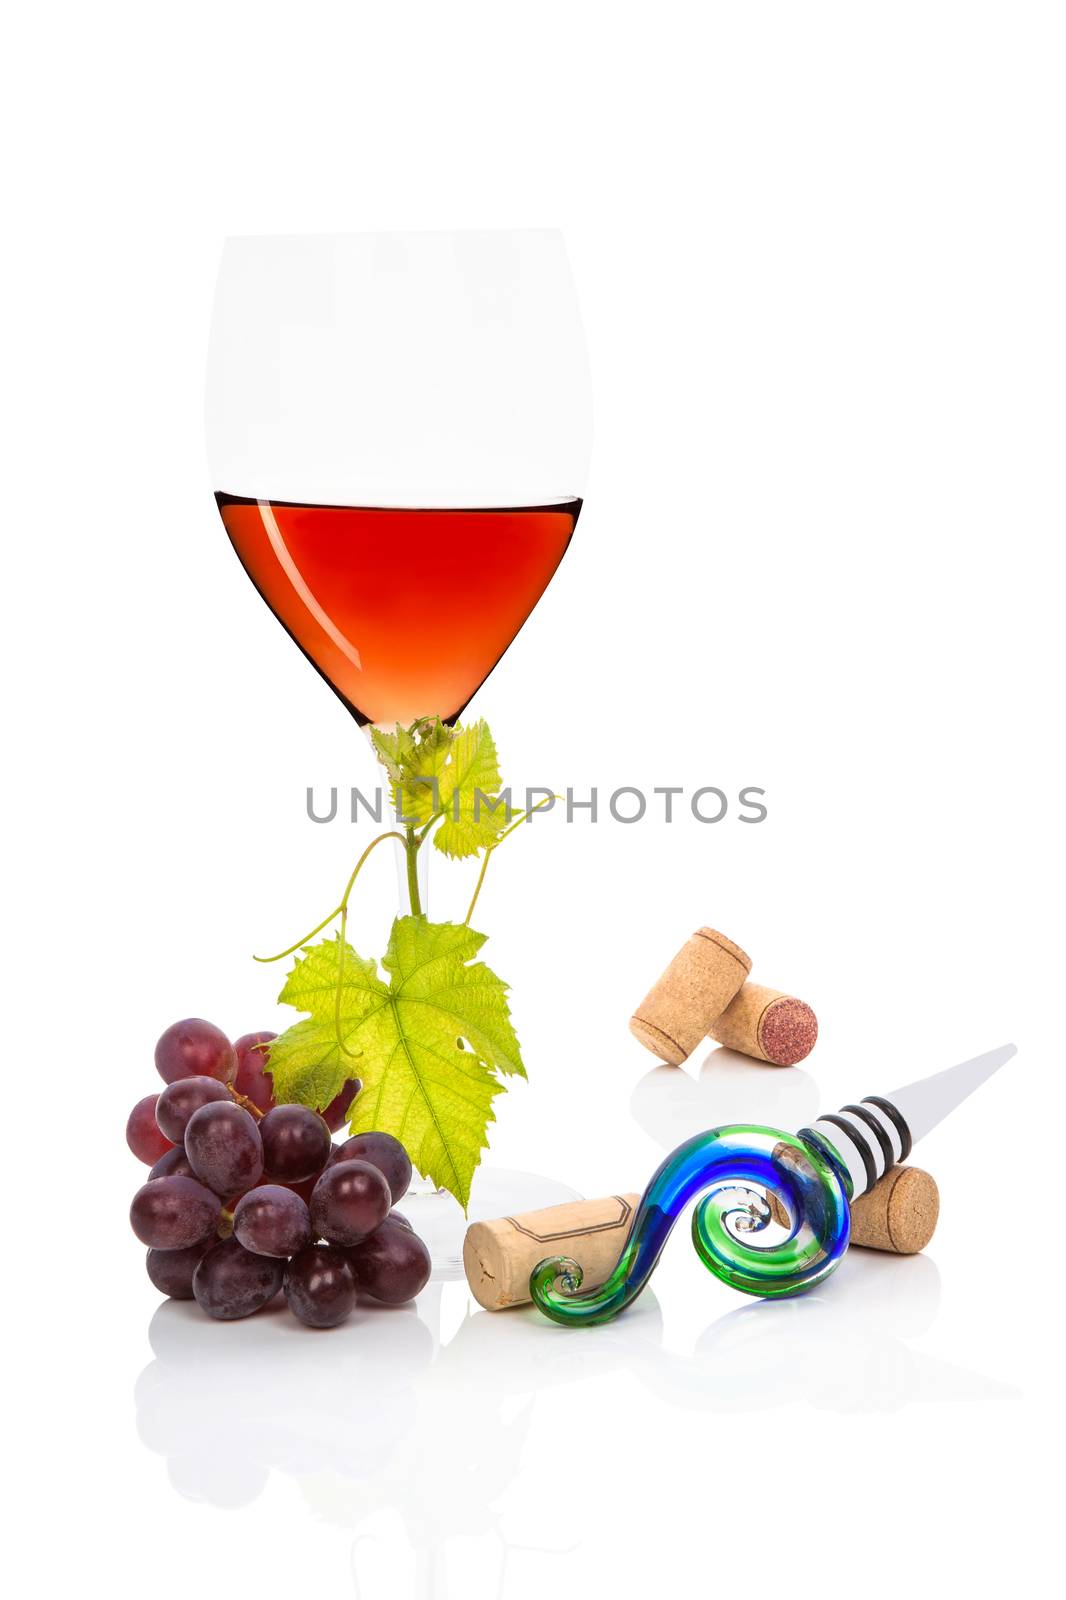 Luxurious rose wine still life. Rose wine in wine glass, red grape, vine leaves, wine corks and wine stopper isolated on white background.